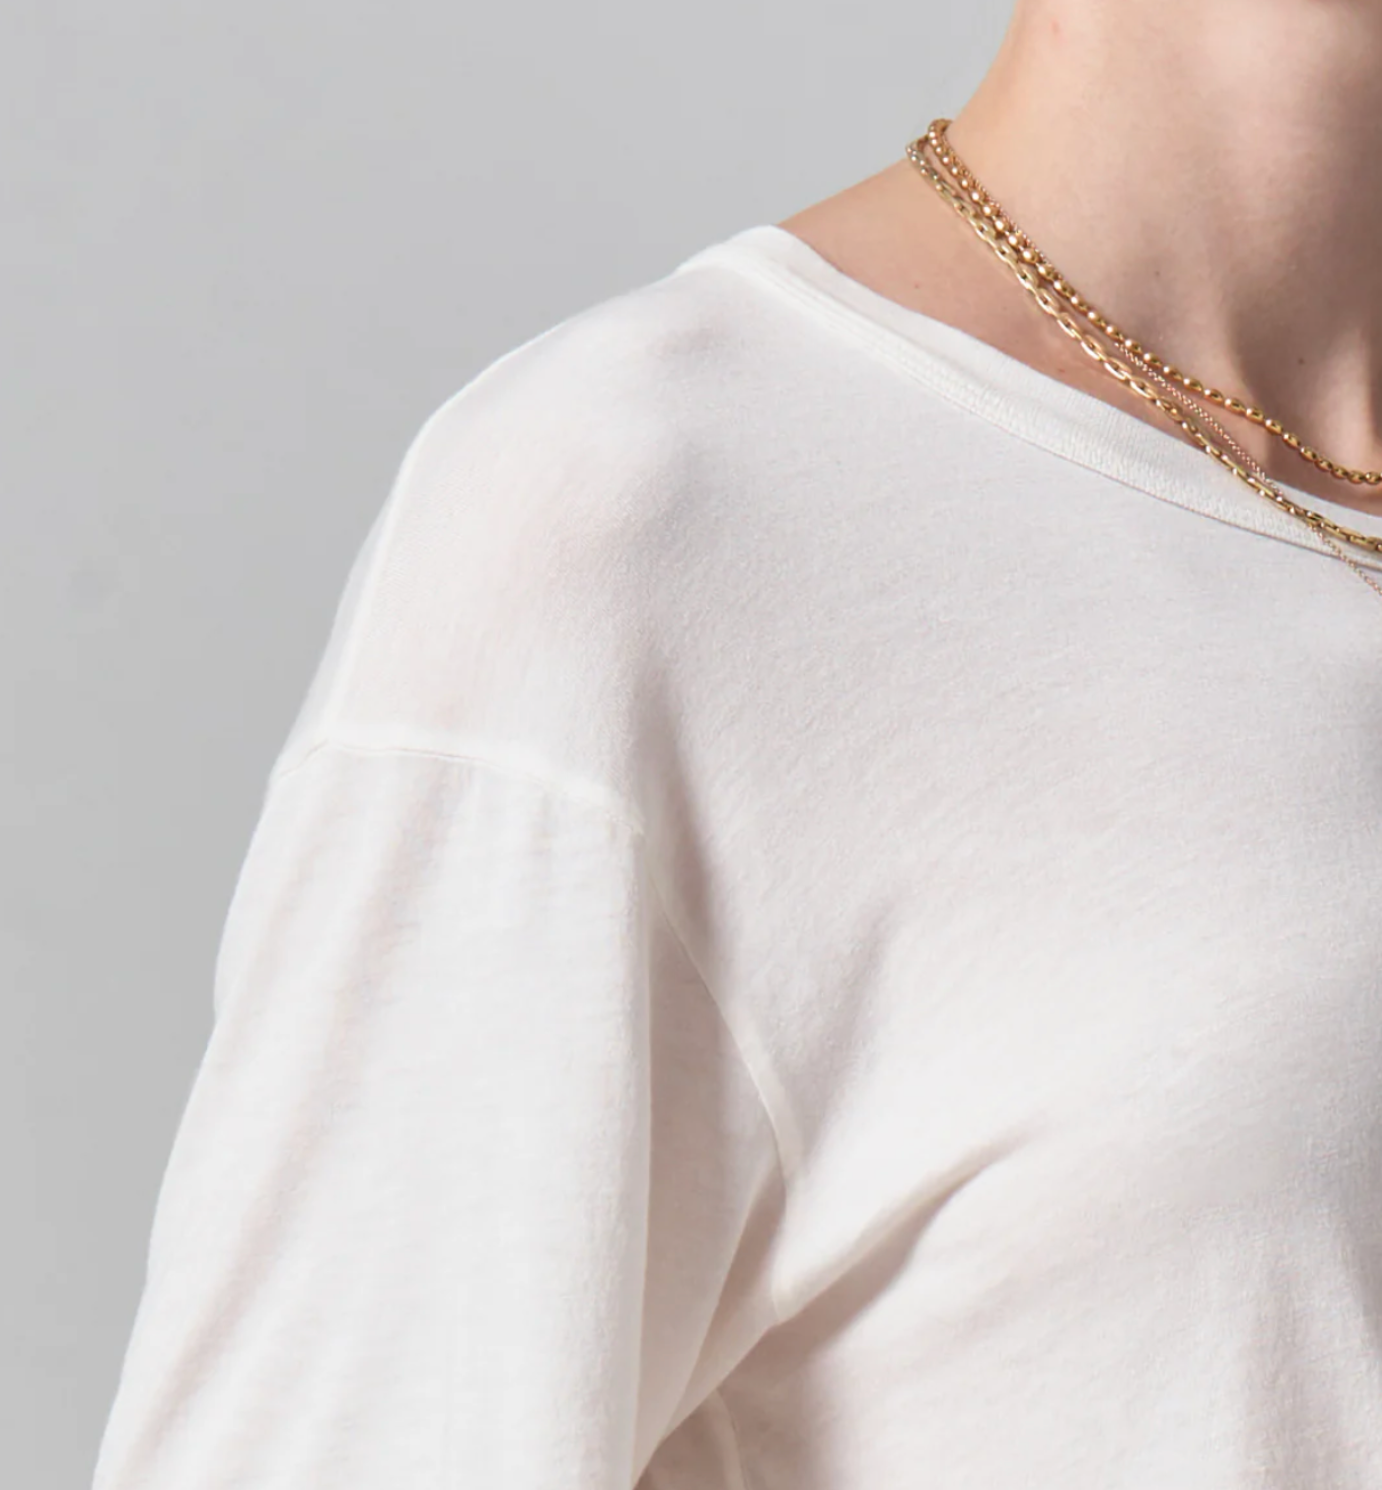 Close-up of a person wearing a Citizens Of Humanity/AGOLDE Elisabetta Relaxed Tee In Pashmina in Arizona style with gold necklaces, focused on the shoulder area against a gray background.